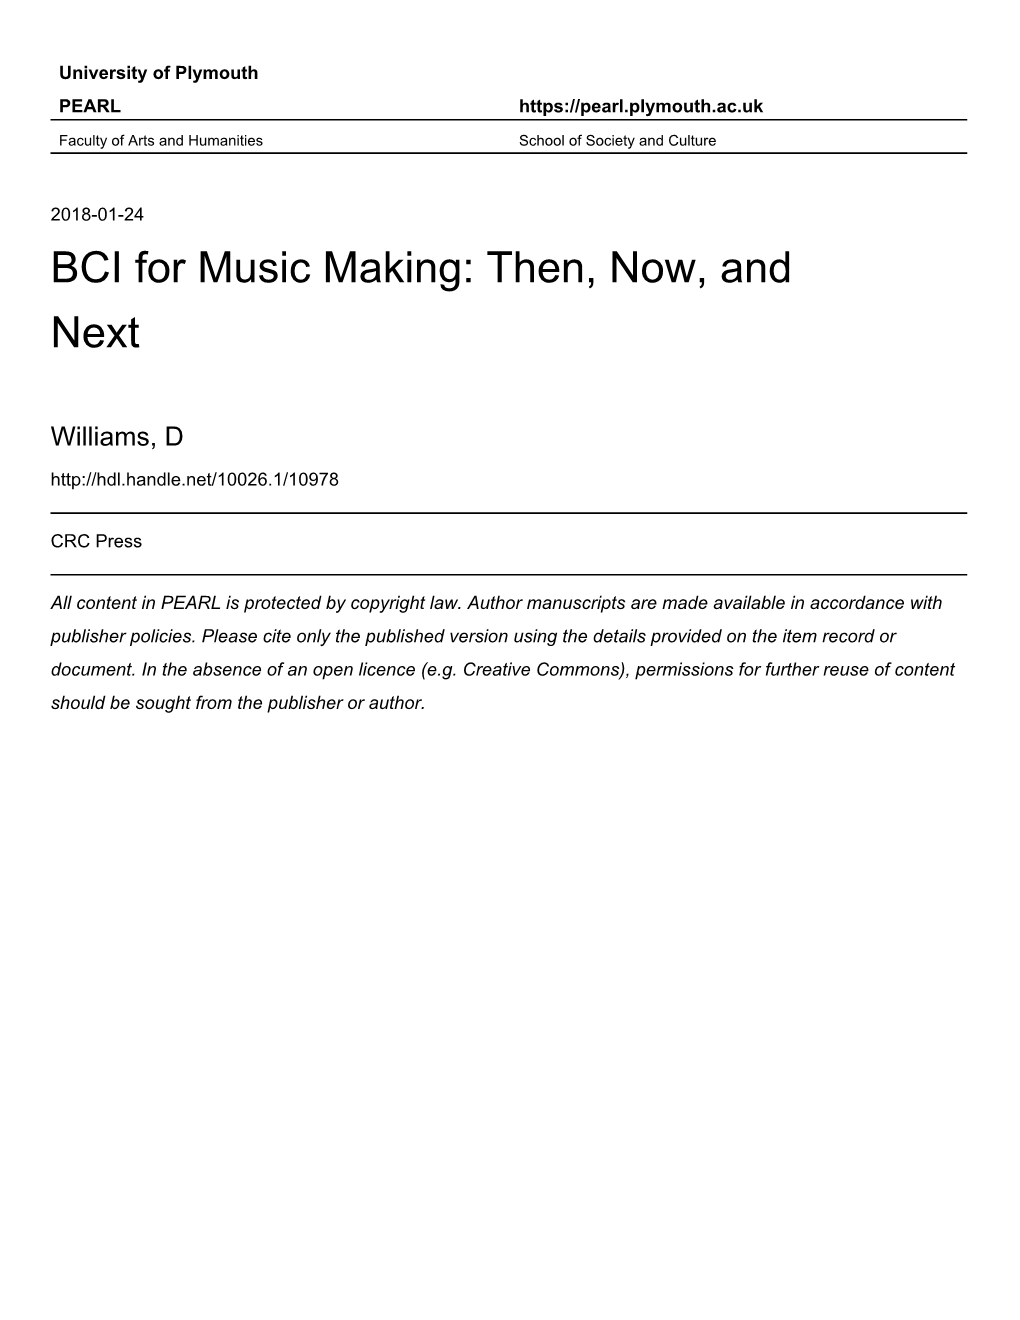 Chapter 10. BCI for Music Making: Then, Now, and Next